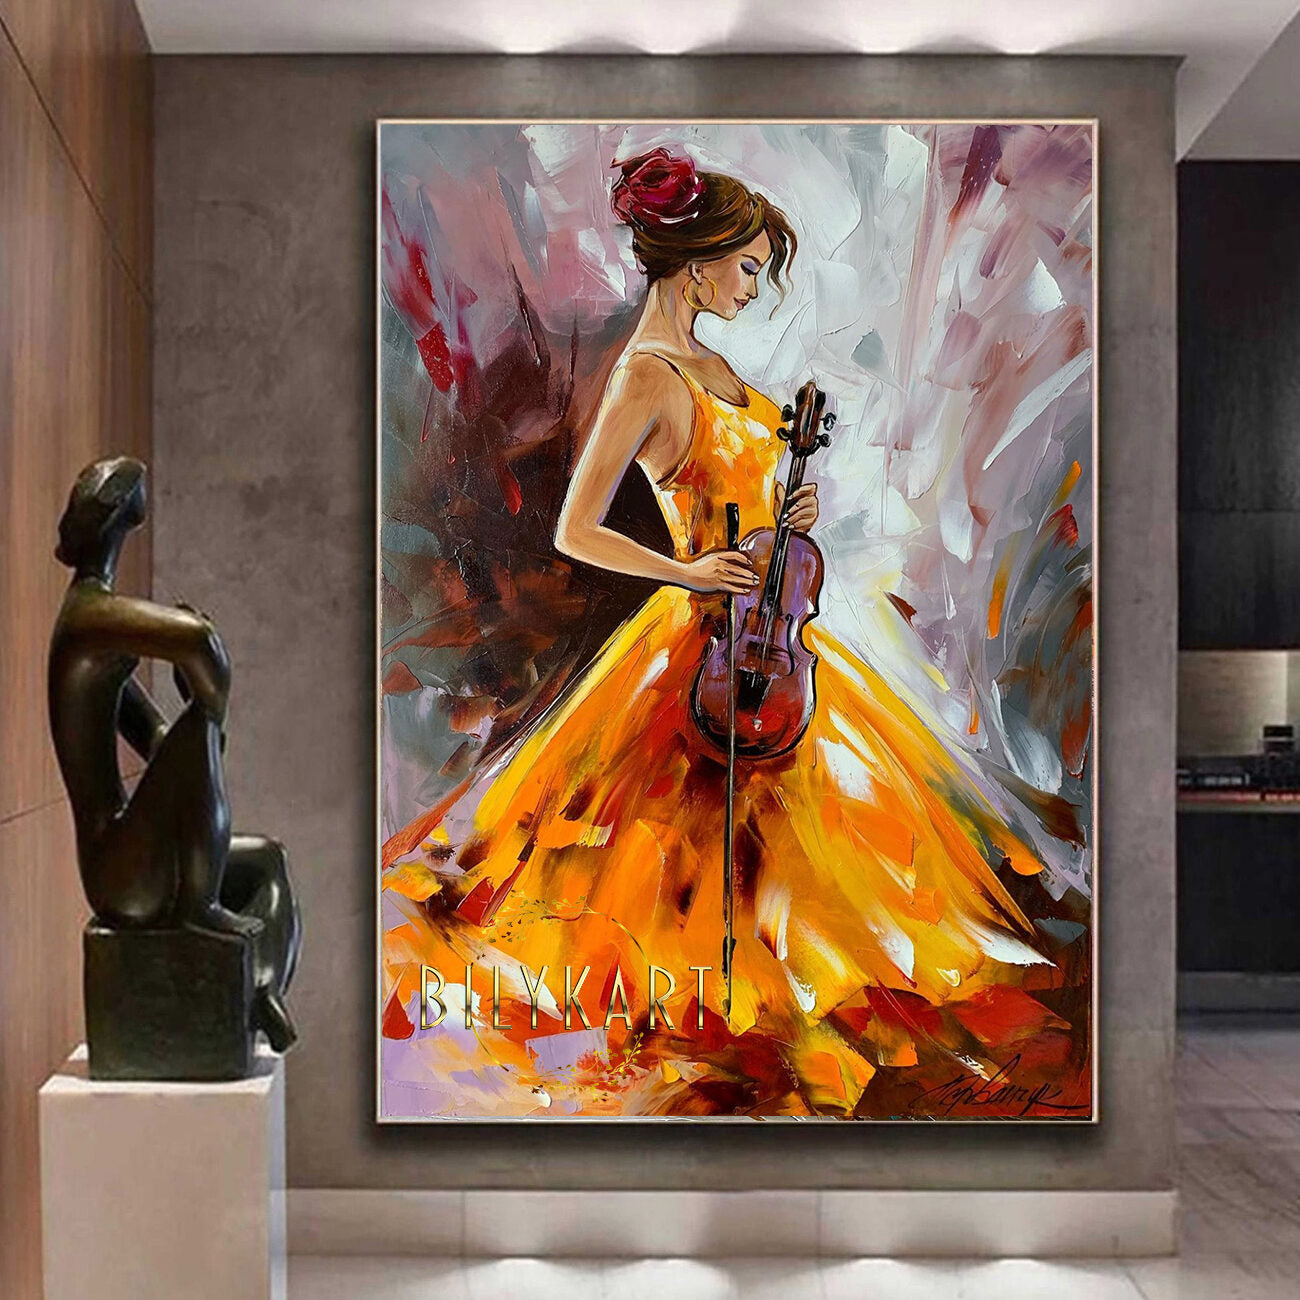 Large Violin Woman Oil Painting On Canvas Abstract Blue Musician Wall Art Oversized Woman In Yellow Dress Painting Violin Artwork